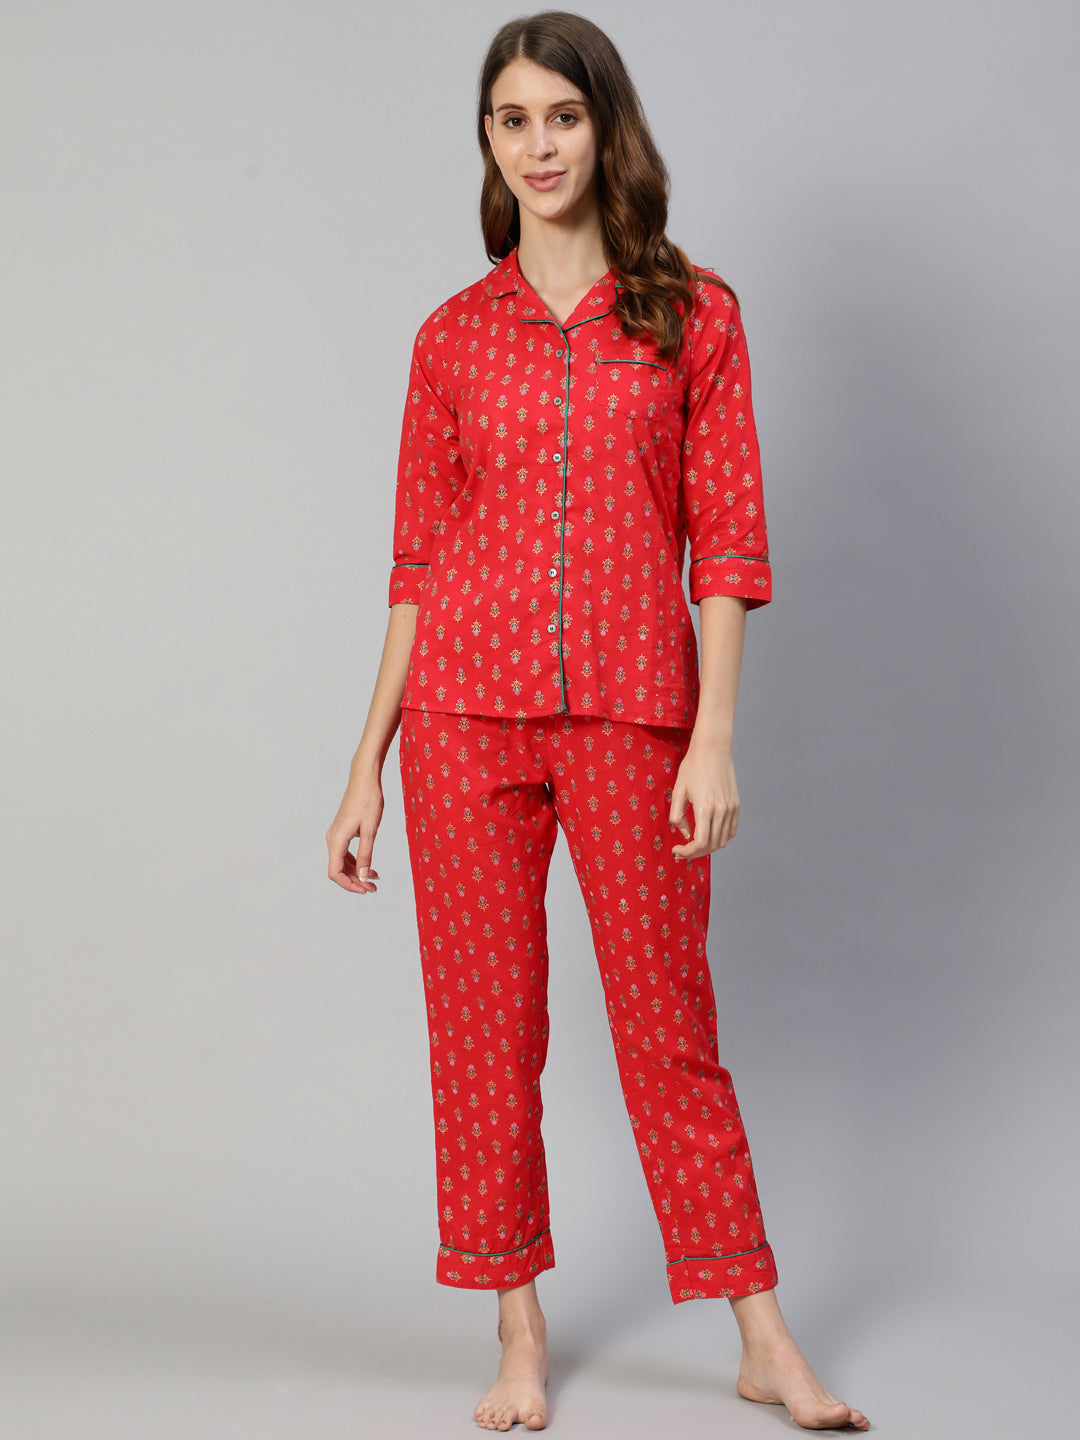 Ishin Women's Red Pure Cotton Floral Printed Night Suit